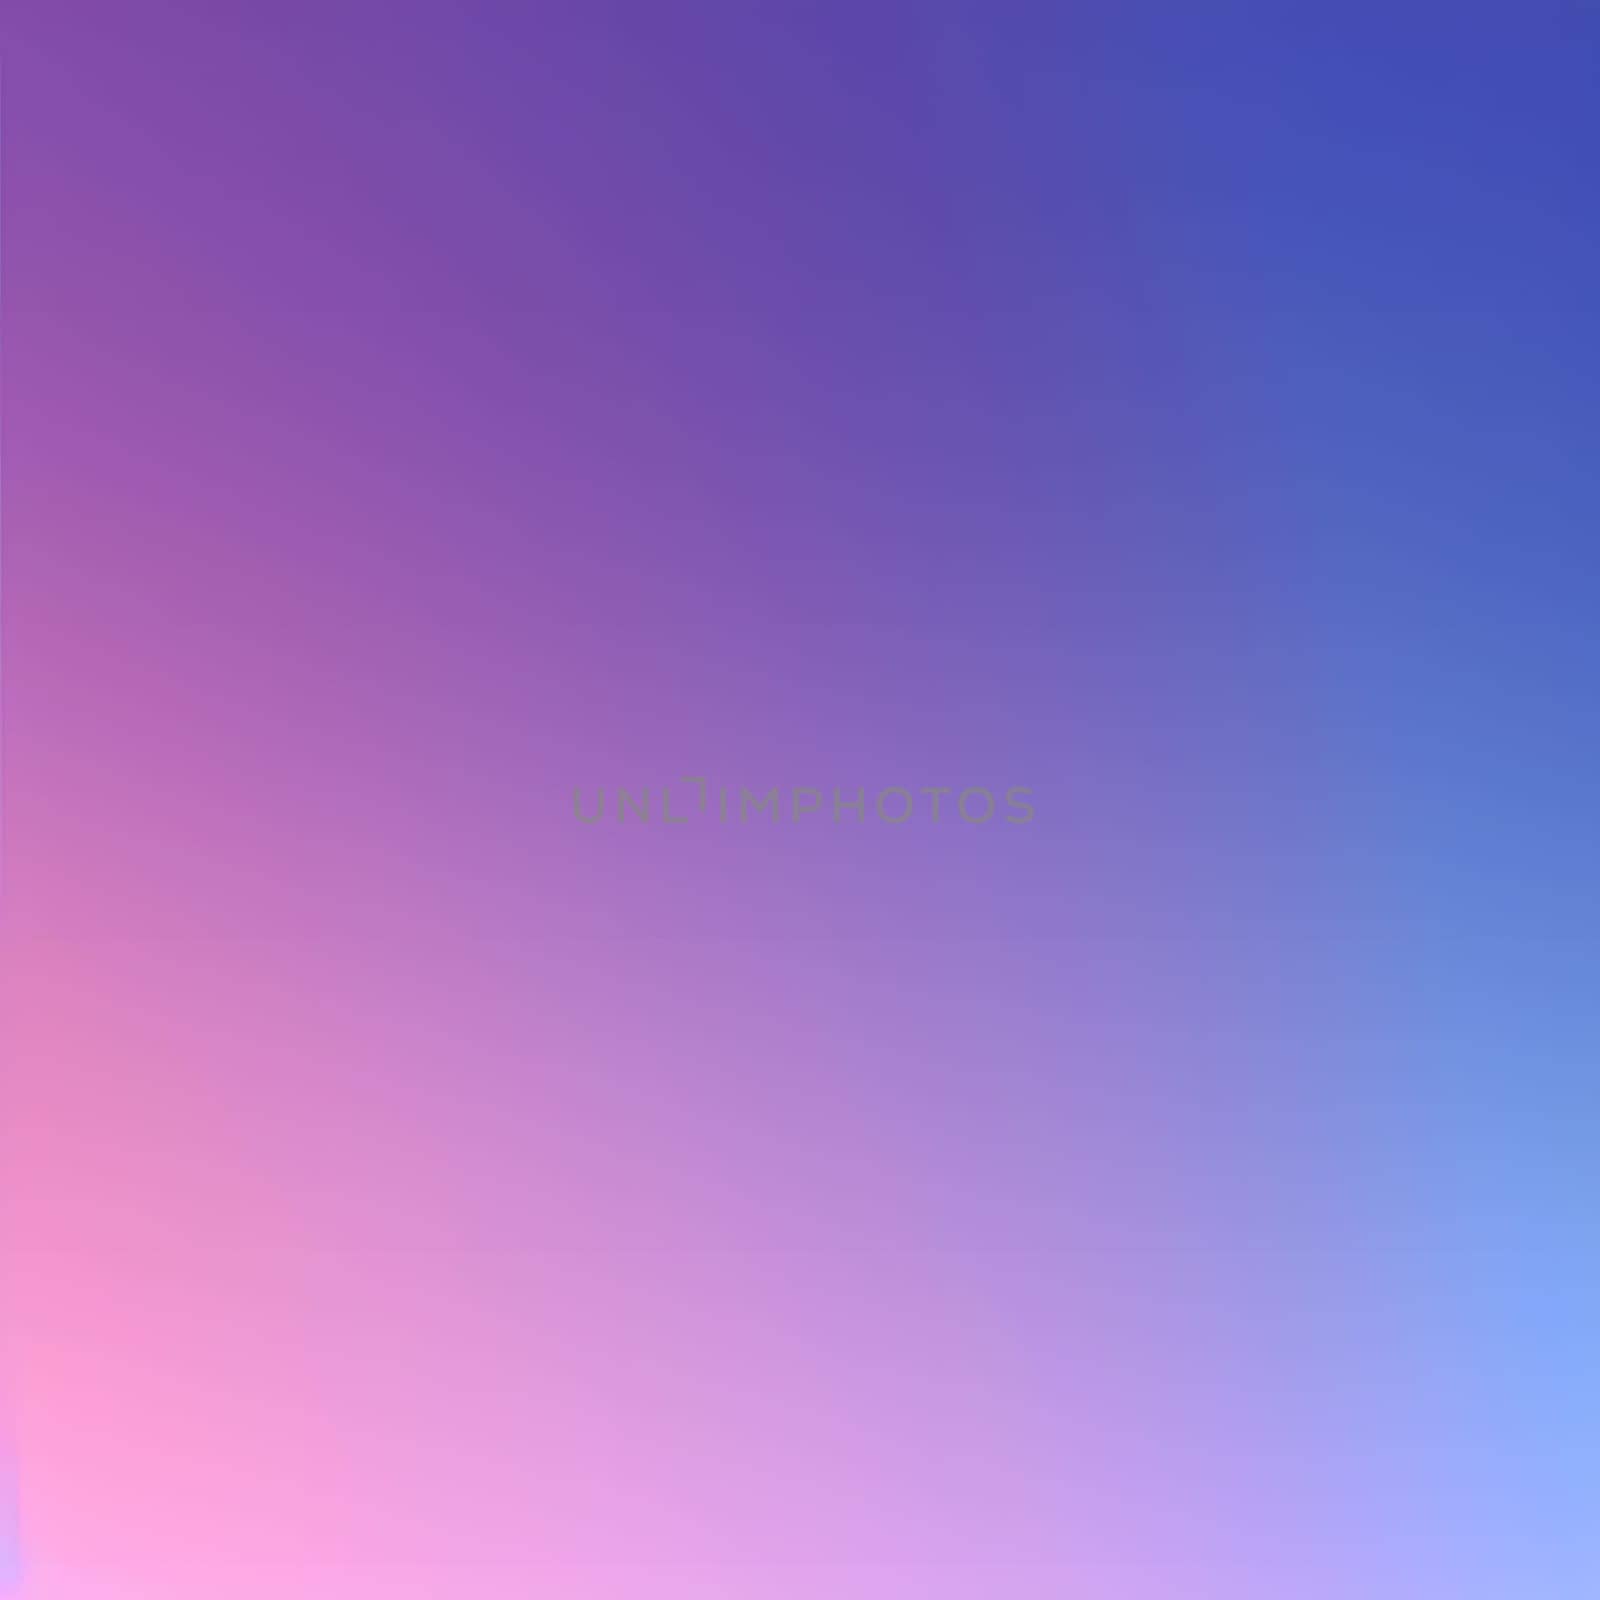 The purple and blue gradient background resembles a sunset sky with hints of magenta and electric blue, creating a mesmerizing pattern on the horizon